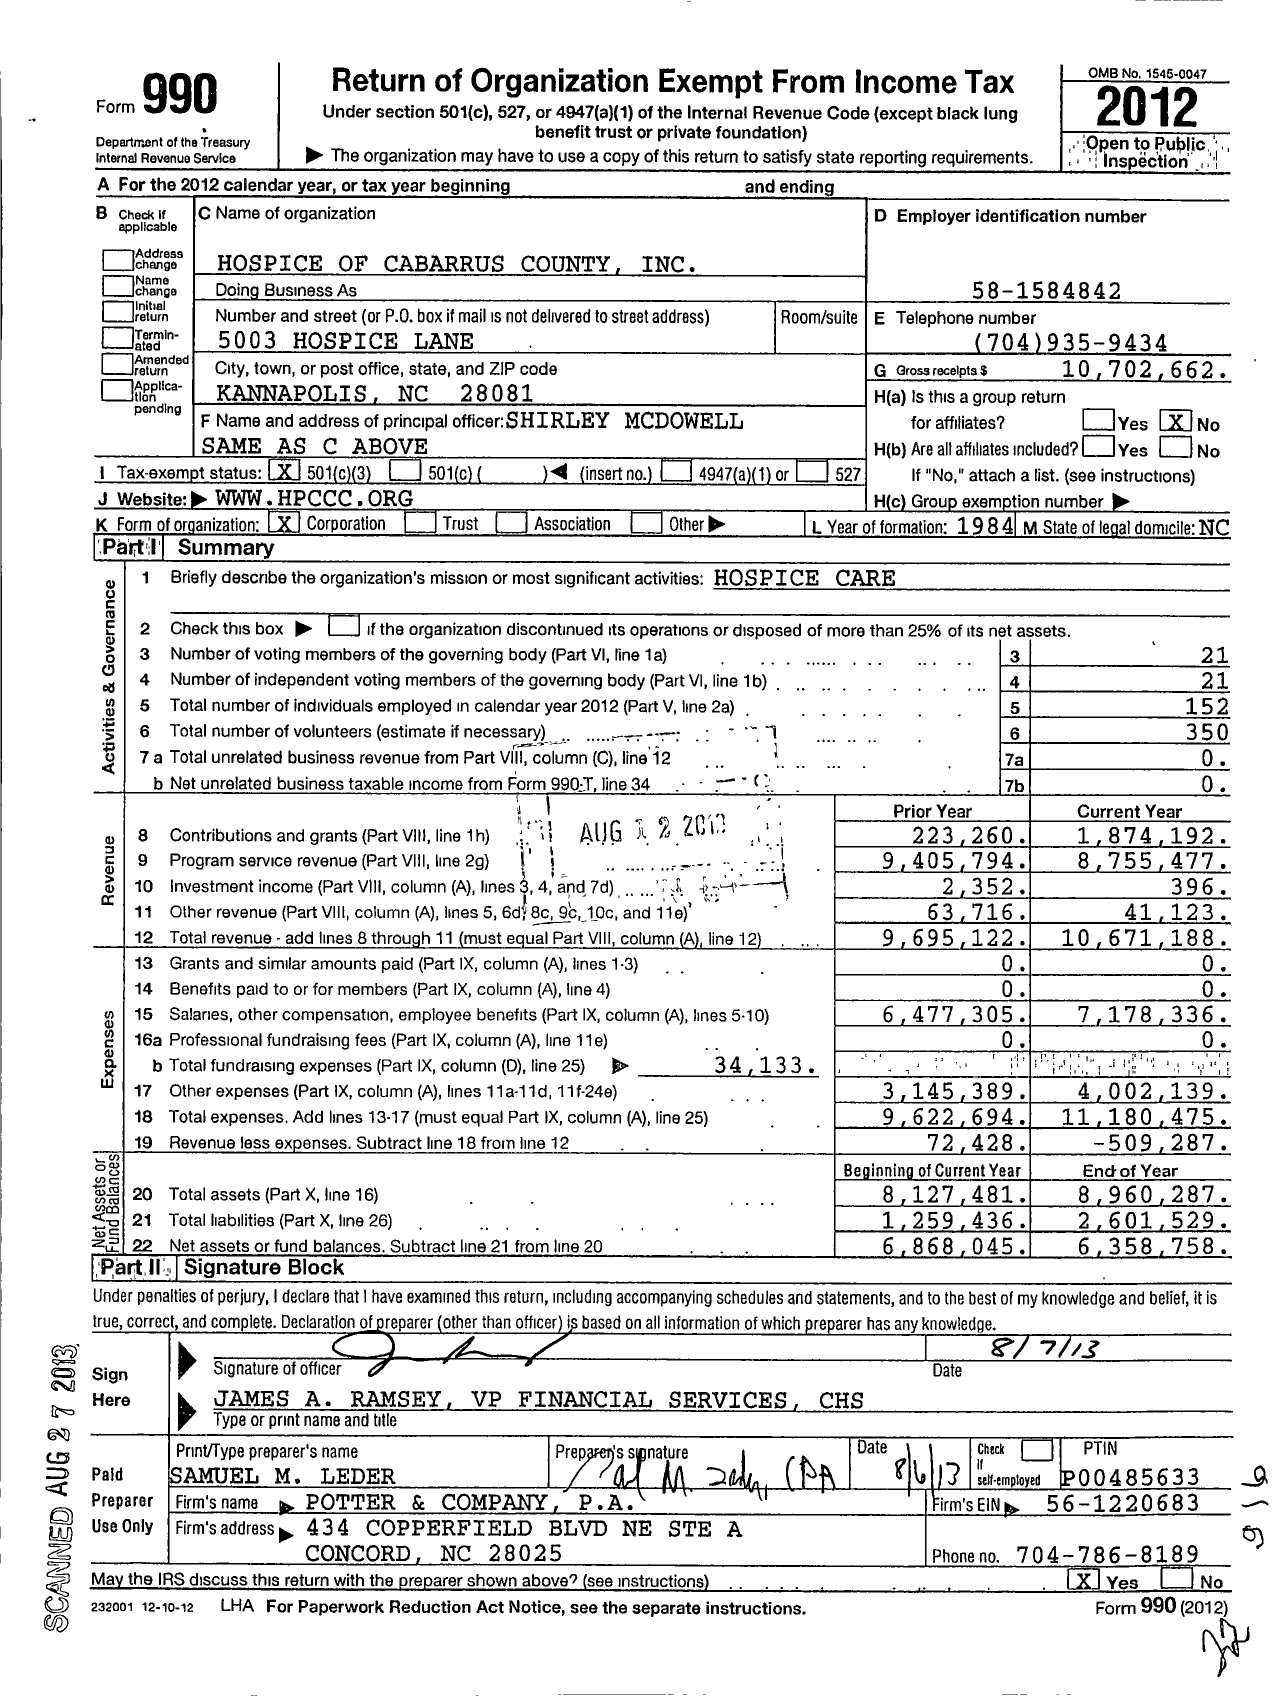 Image of first page of 2012 Form 990 for Hospice of Cabarrus County